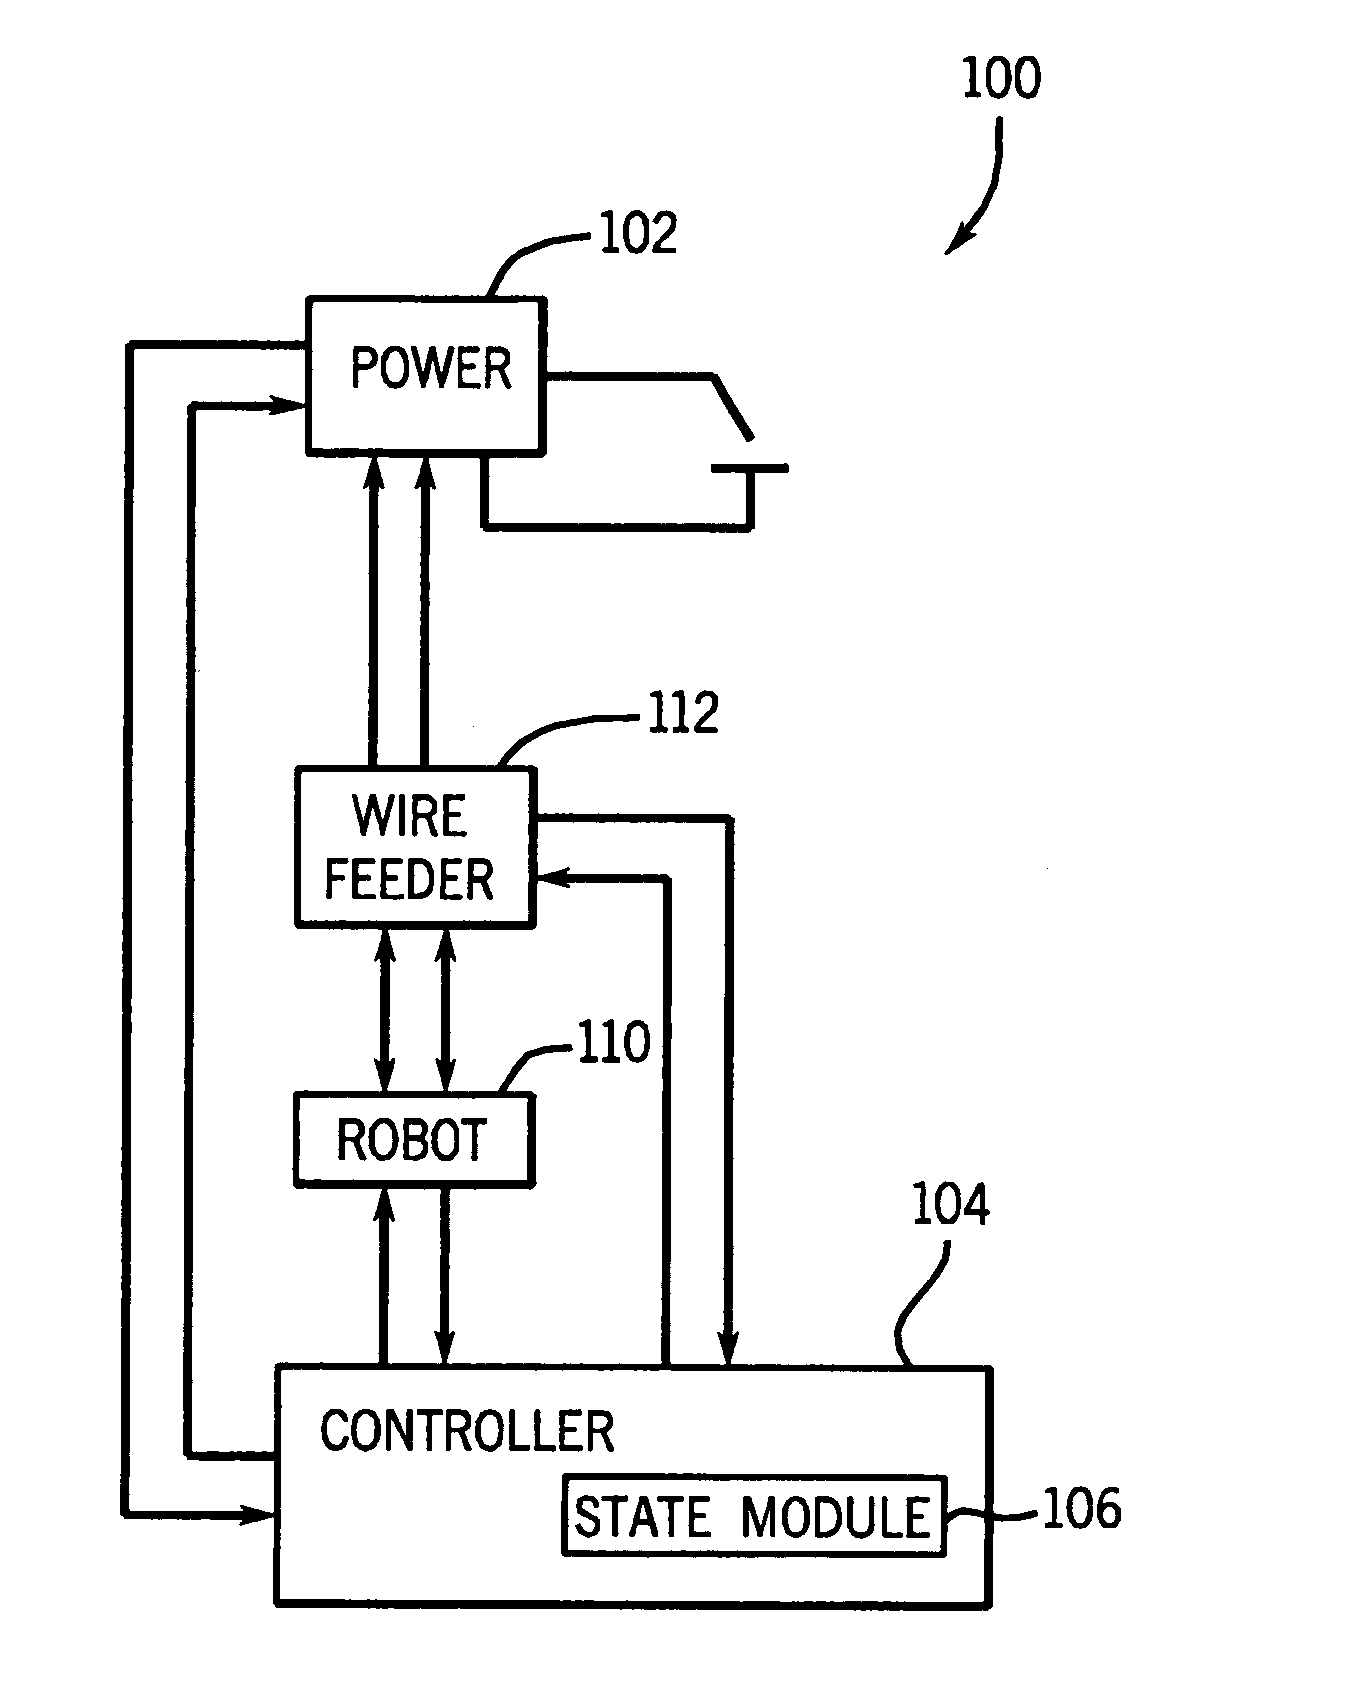 Welding-type power supply with a state-based controller